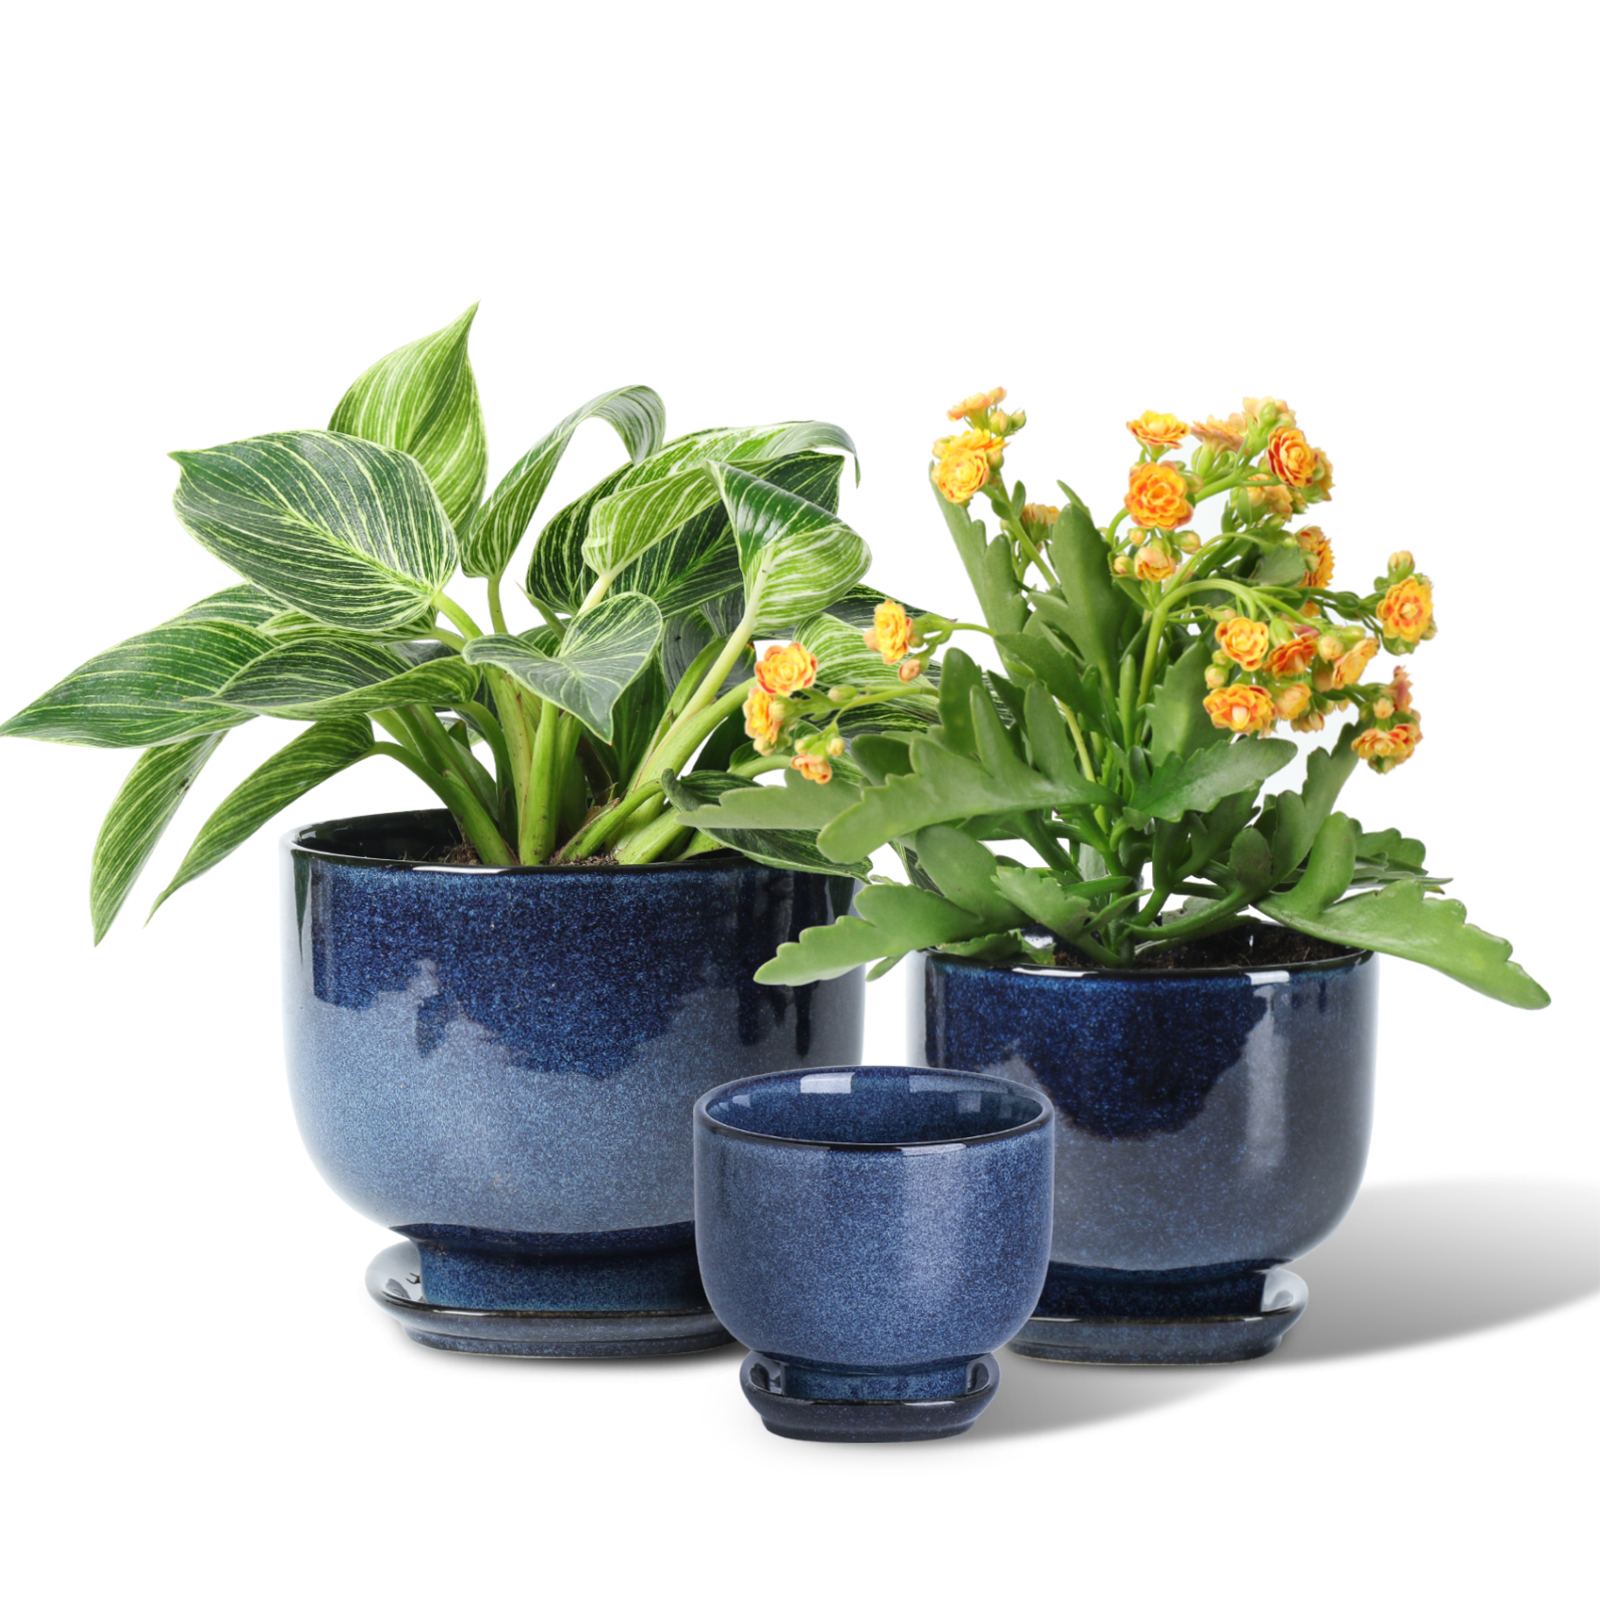 vicrays Ceramic Plant Pots Indoor - 6.8/5.5/4.3 Inch Planter Pot with  Drainage Hole and Saucer for Succulent Orchid Flower Herbs Cactus -  Gardening Home Desktop Office Decor – Set of 3 Starry Blue - Vicrays  Ceramics